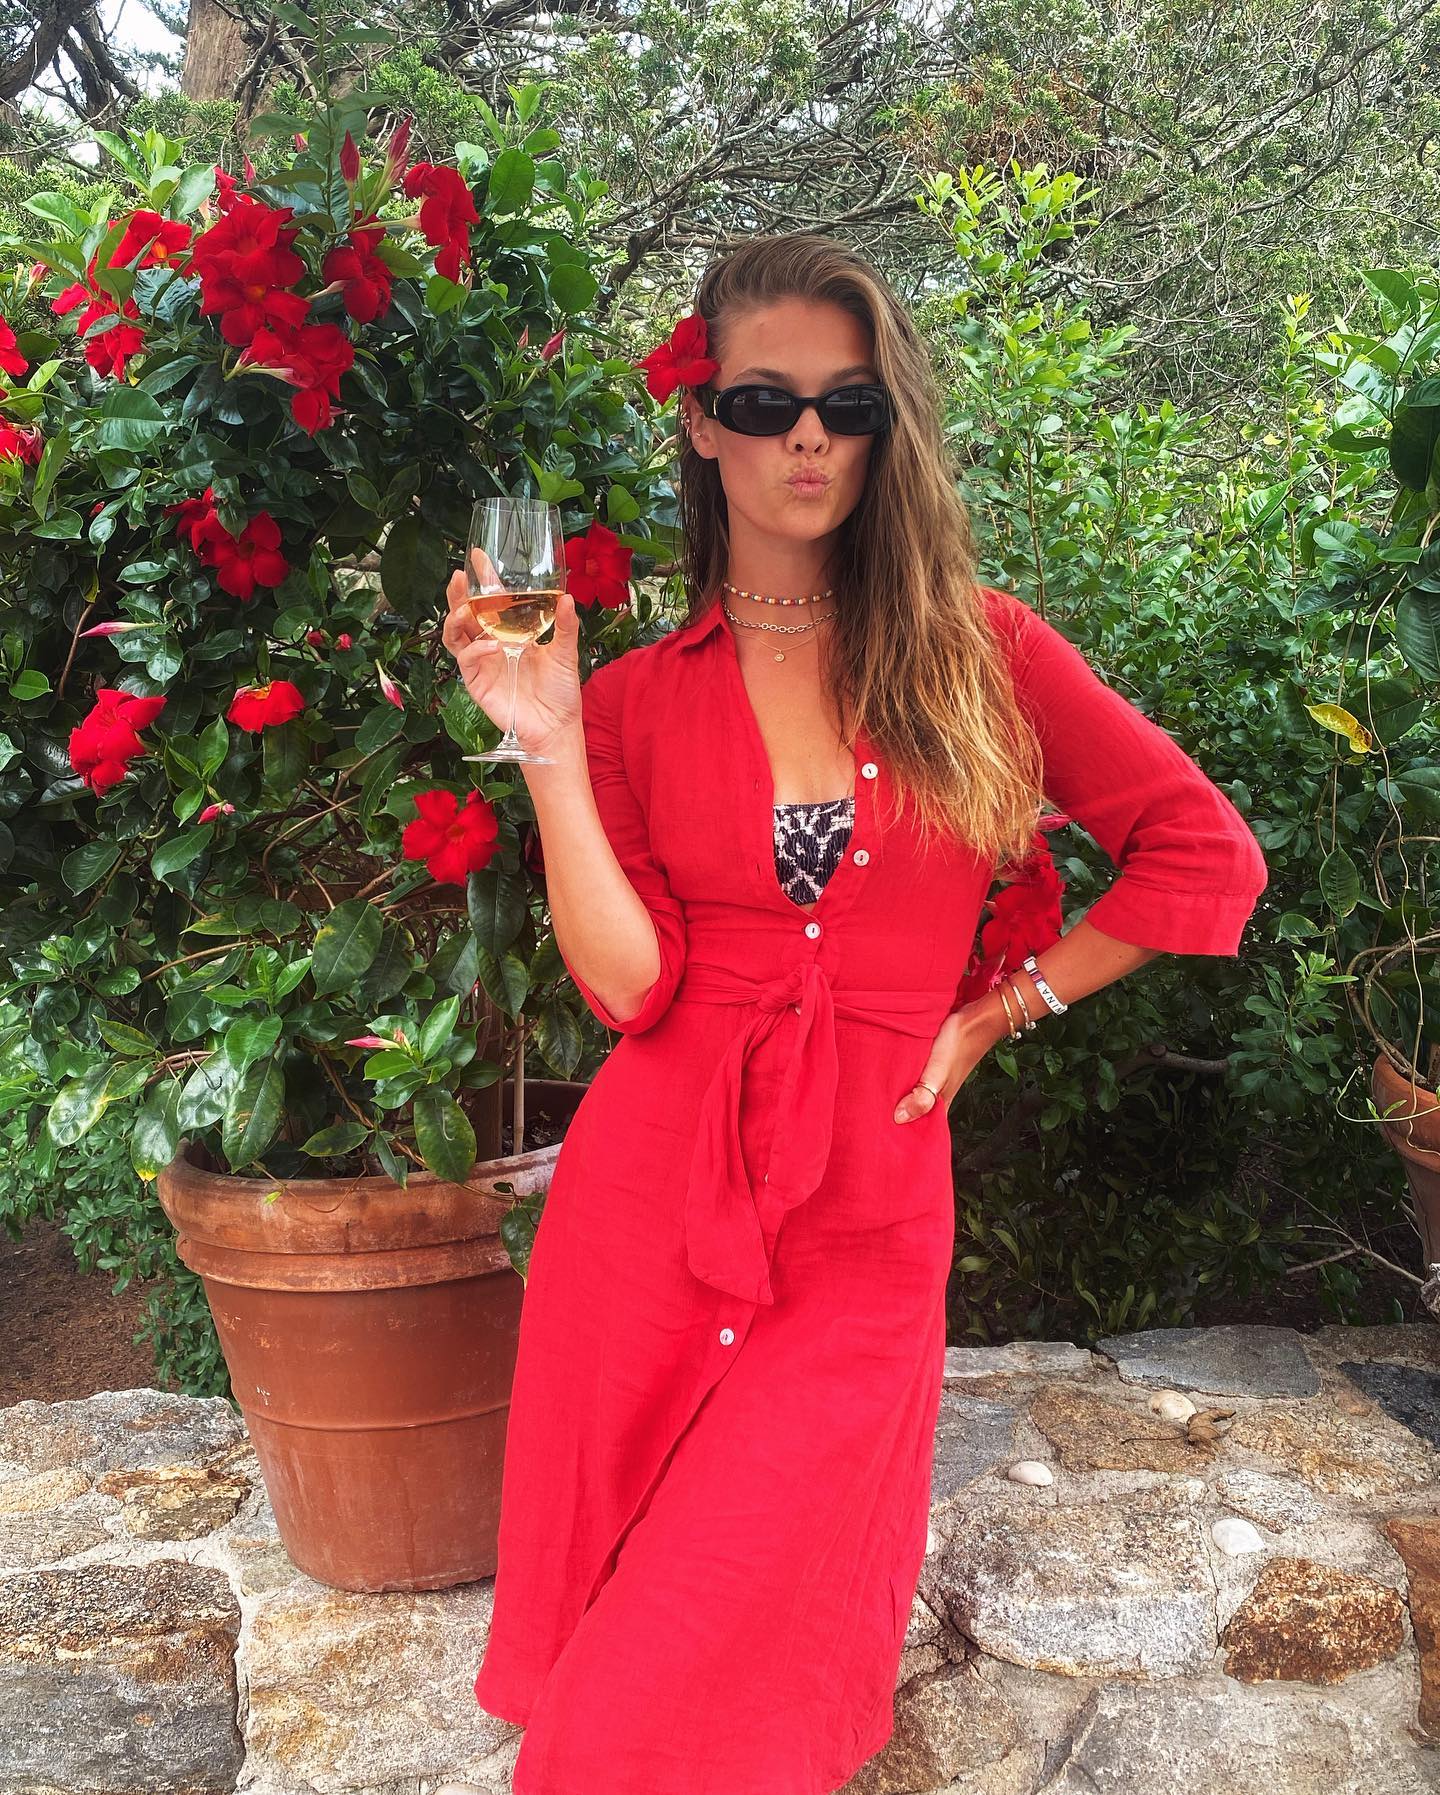 Photos n°5 : Nina Agdal is The Lady in Red!